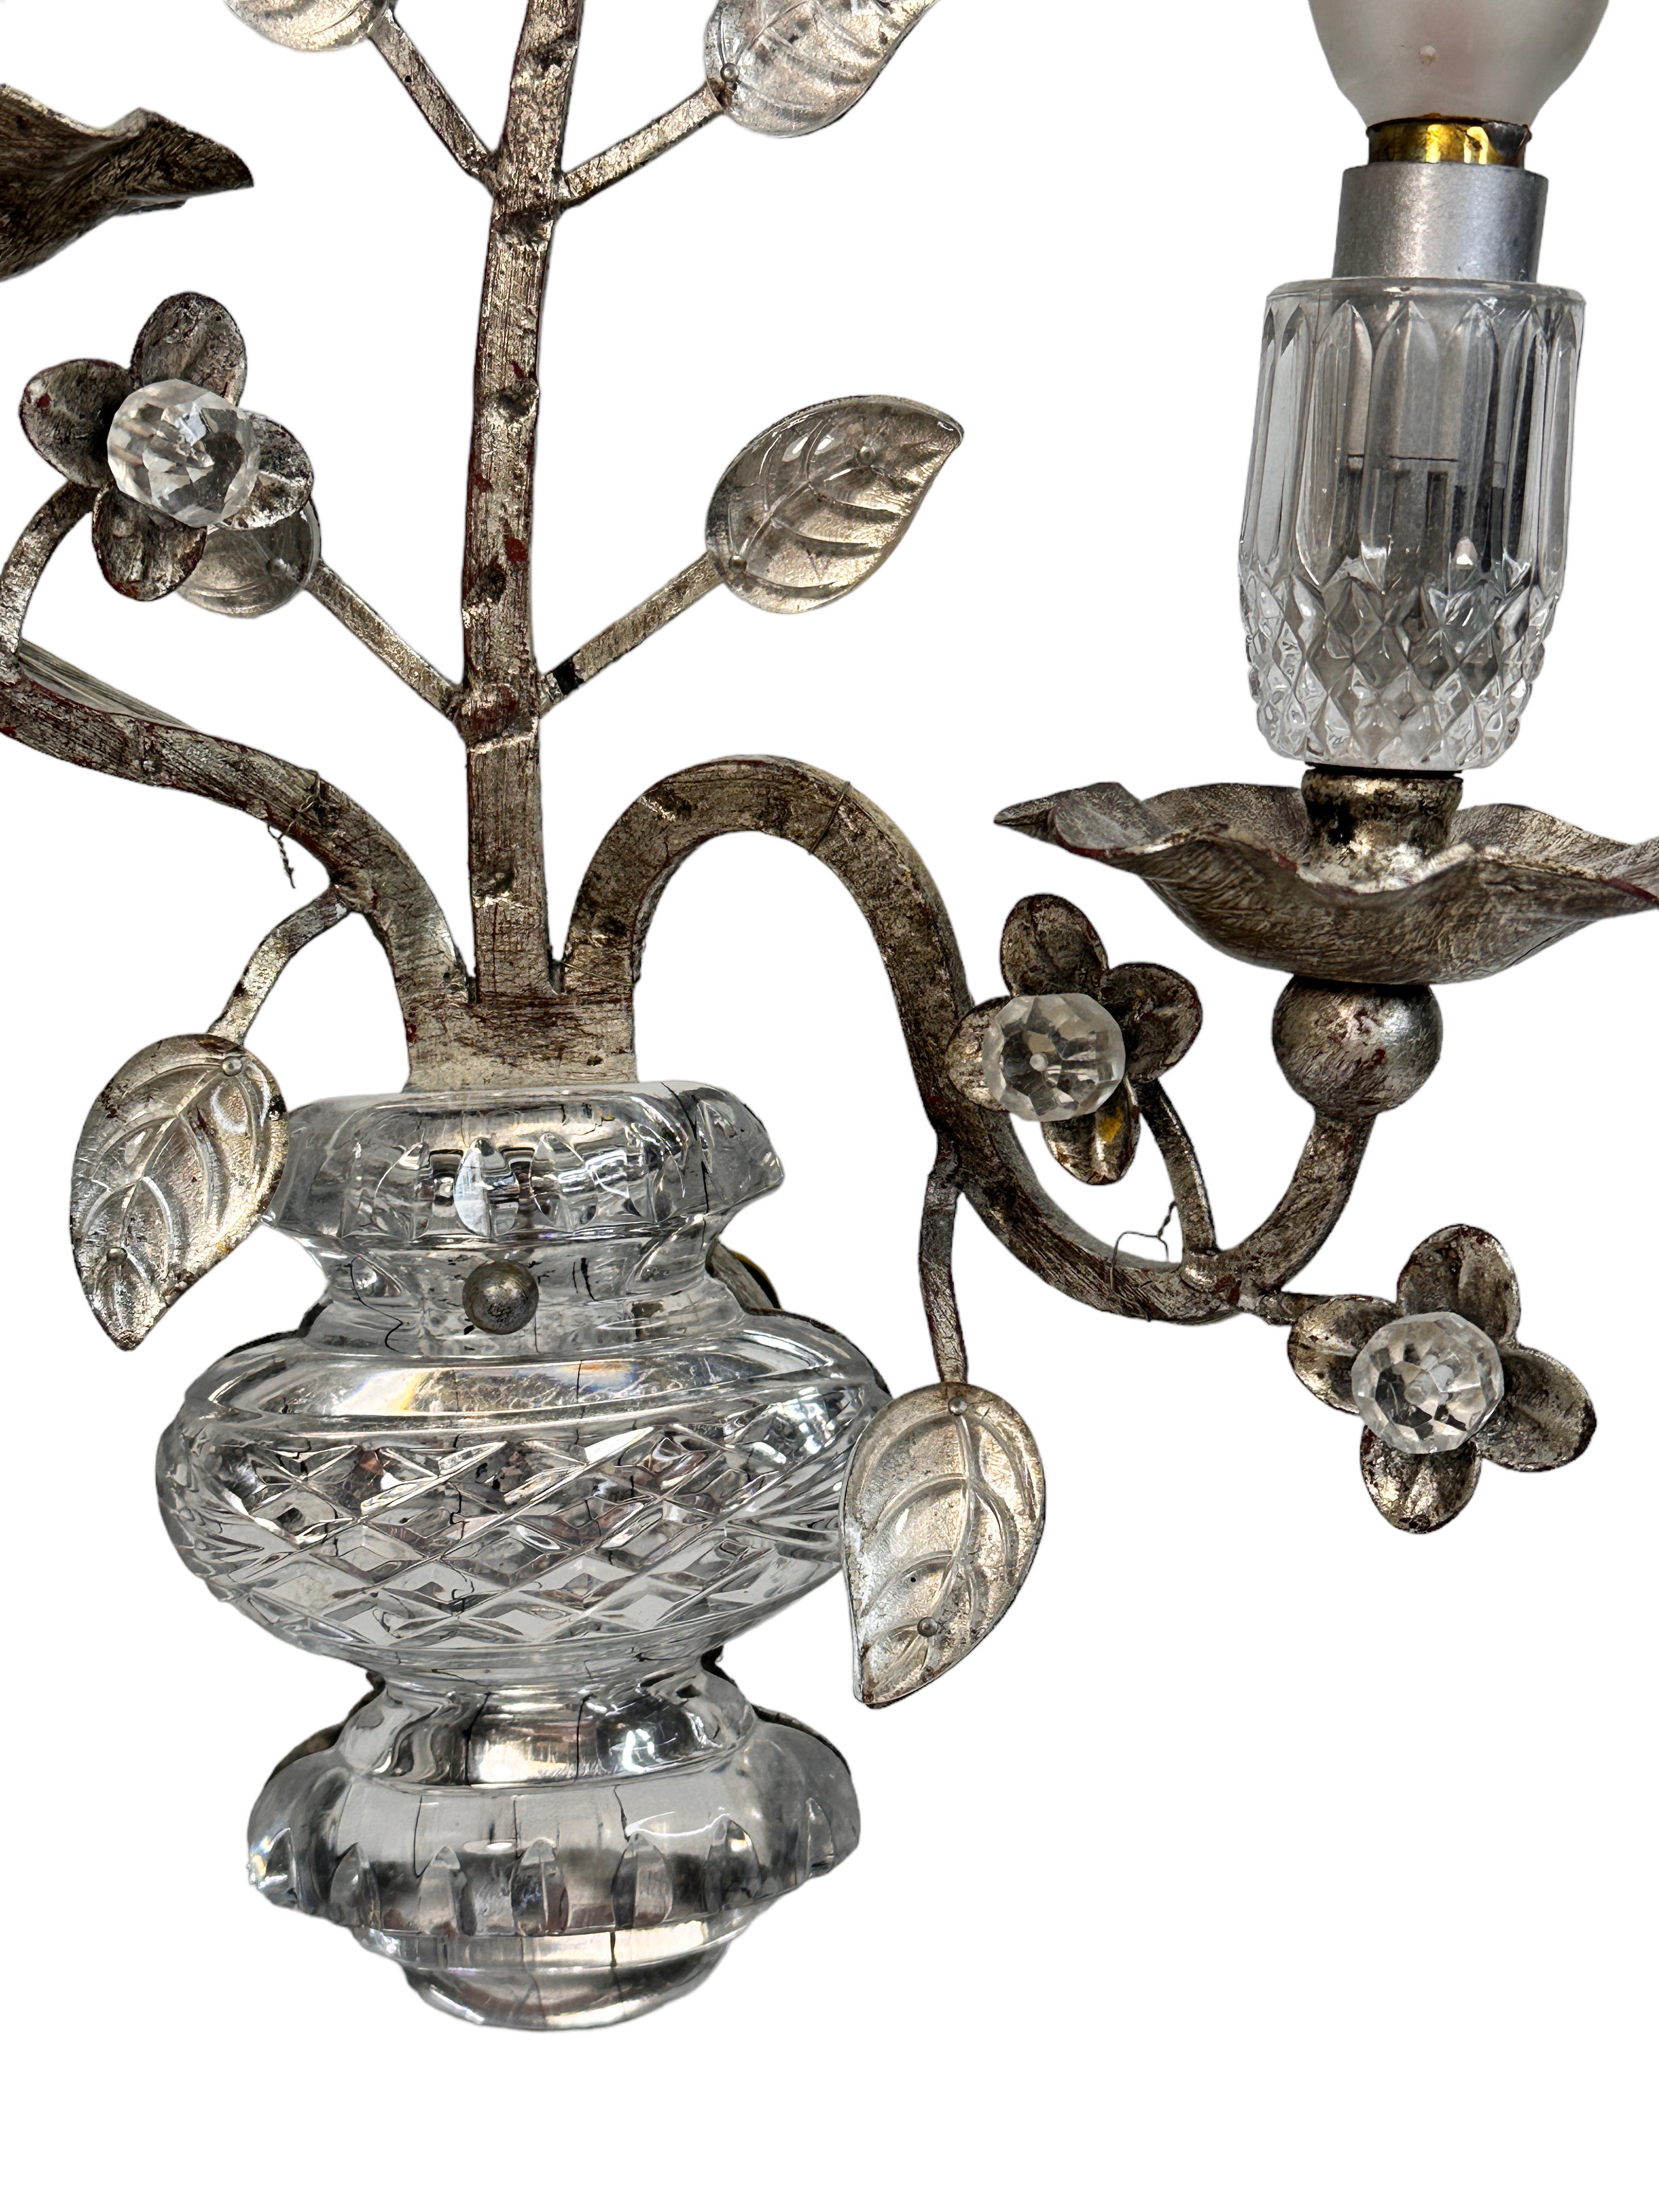 Pair of gilt iron floral sconces by Banci Firenze with crystal urn motif, socket cover also made of crystal glass. Each fixture requires two European E14 candelabra bulbs, each bulb up to 40 watts. The wall lights have a beautiful patina and gives